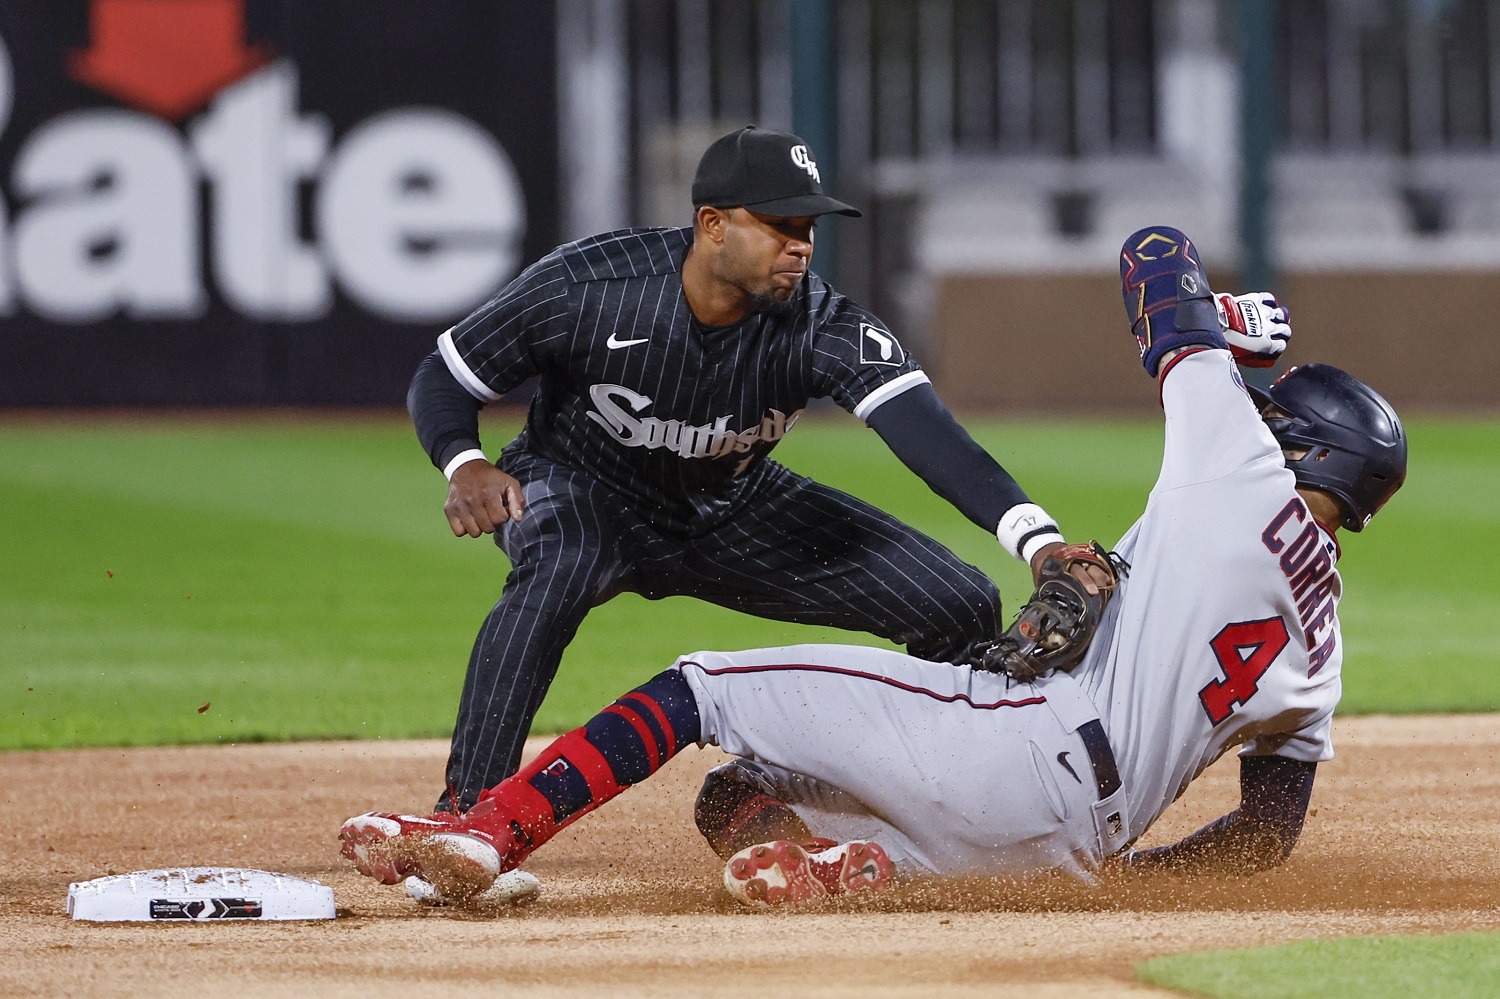 MLB's bigger bases could lead to more steals, fewer injuries